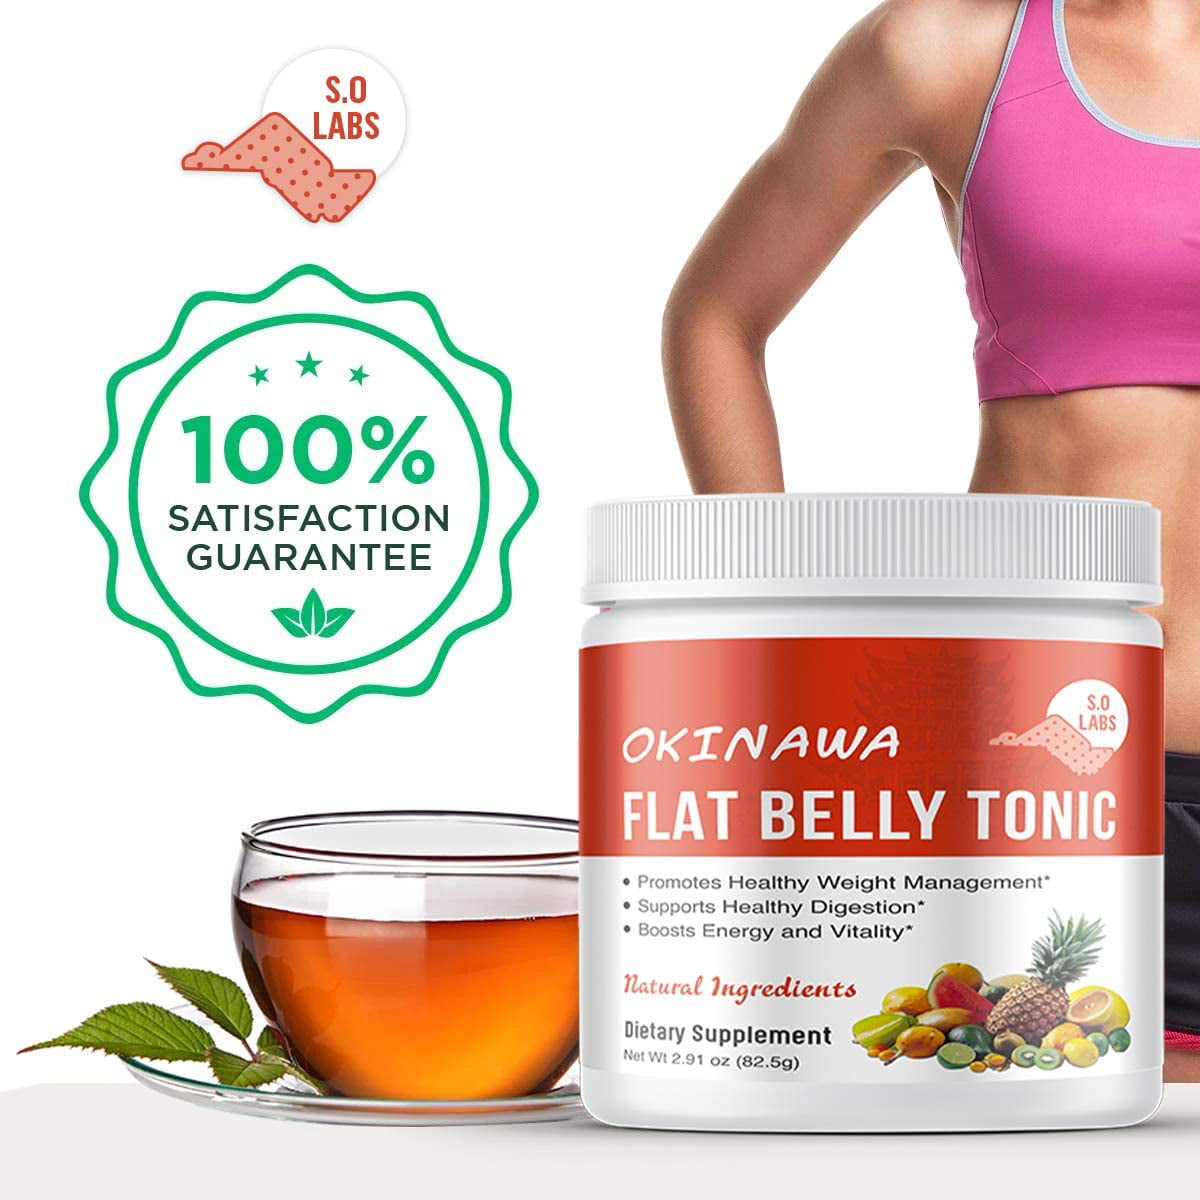 Okinawa Flat Belly Tonic Reviews - Weight Loss Powder Drink Mix & Japanese Tonic Melts Fat Its's Scam Or Legit? Discover Magazine